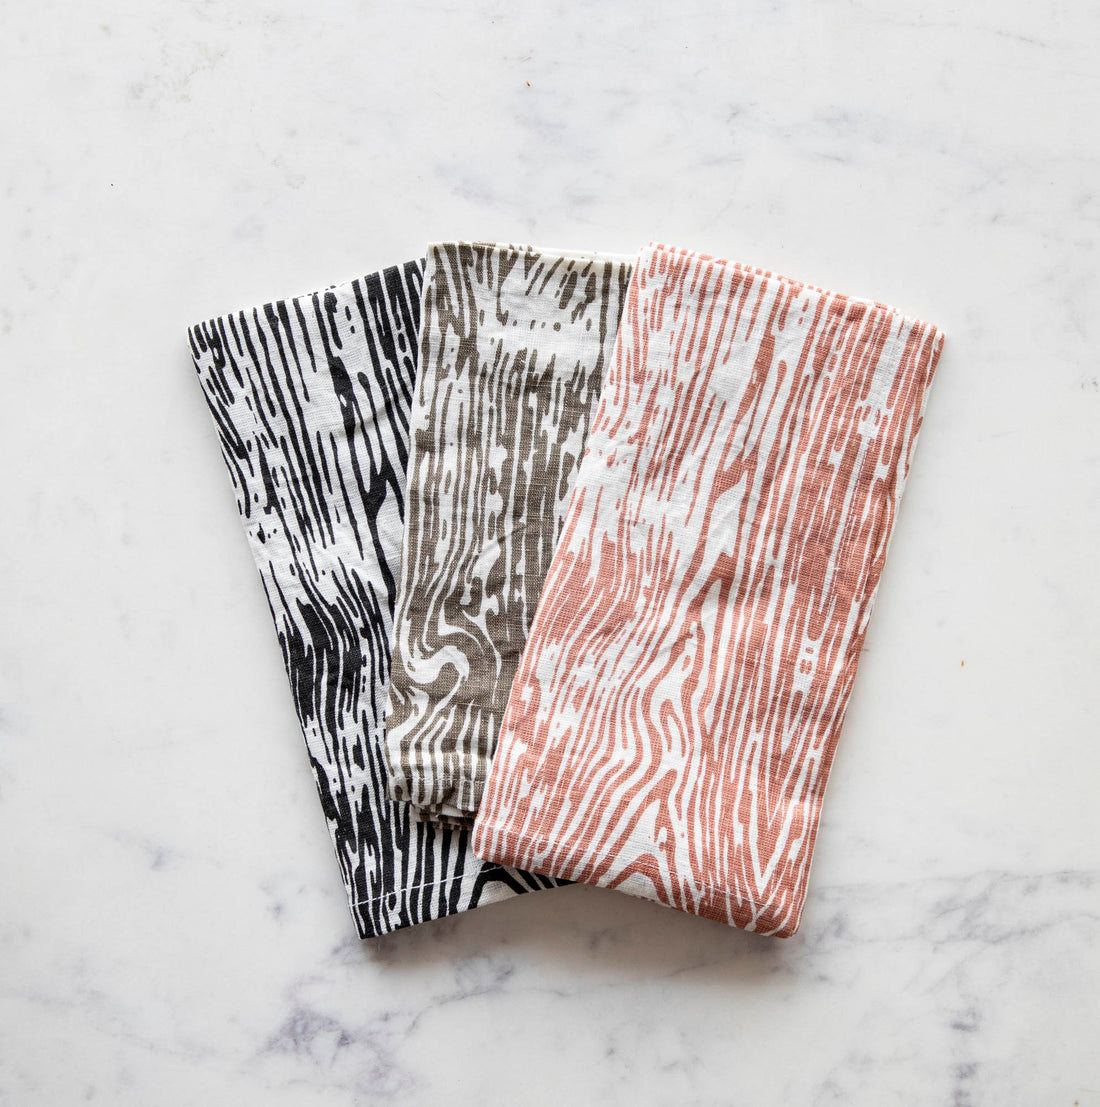 Three folded Faux Bois napkins by SIR/MADAM with abstract patterns on a marble surface.